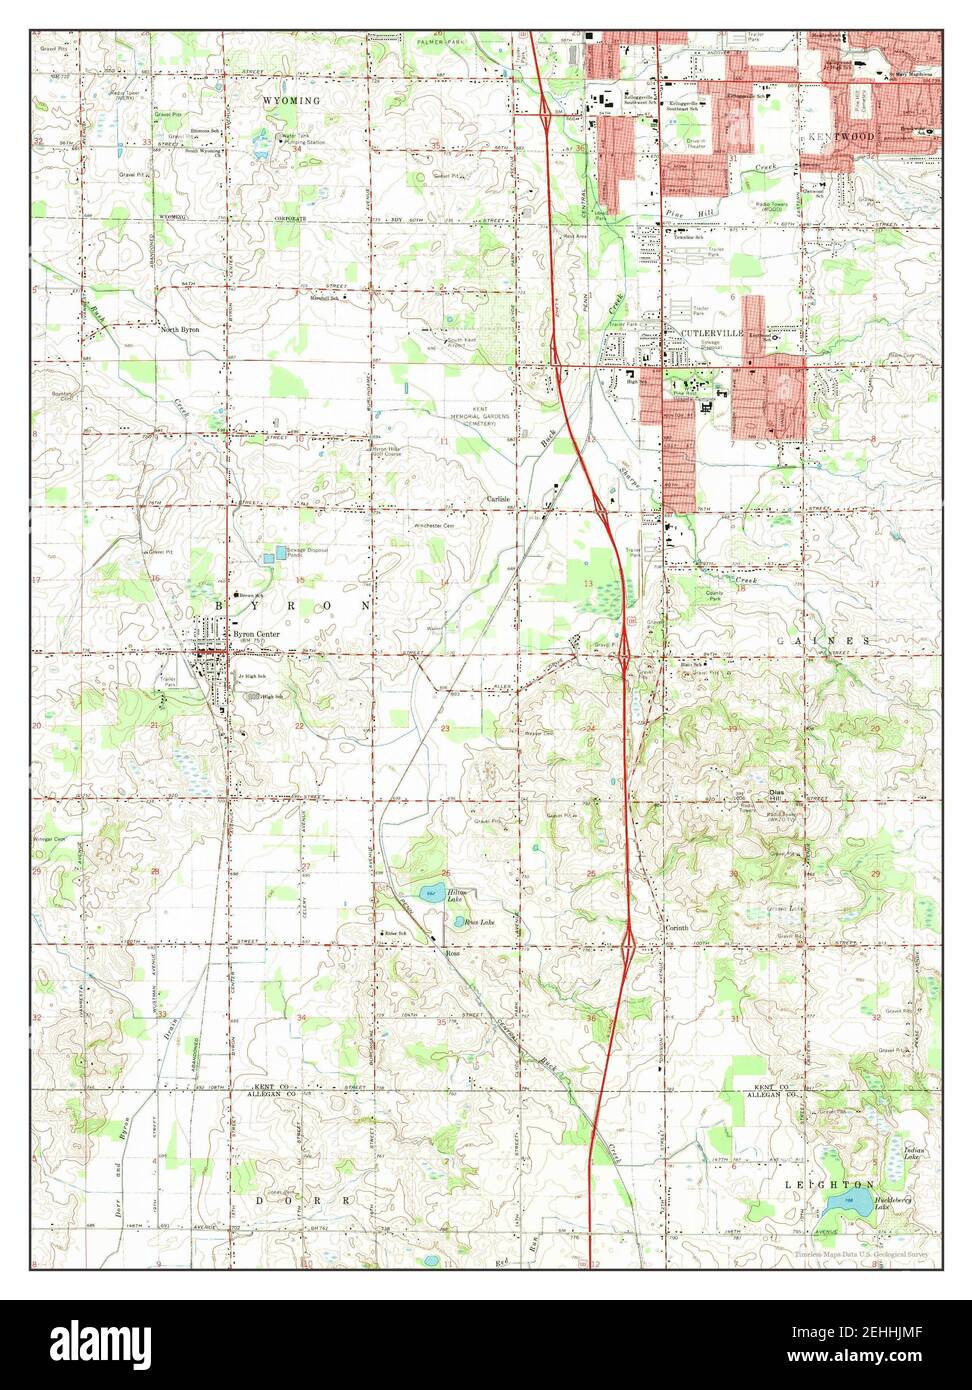 Cutlerville, Michigan, map 1967, 1:24000, United States of America by Timeless Maps, data U.S. Geological Survey Stock Photo